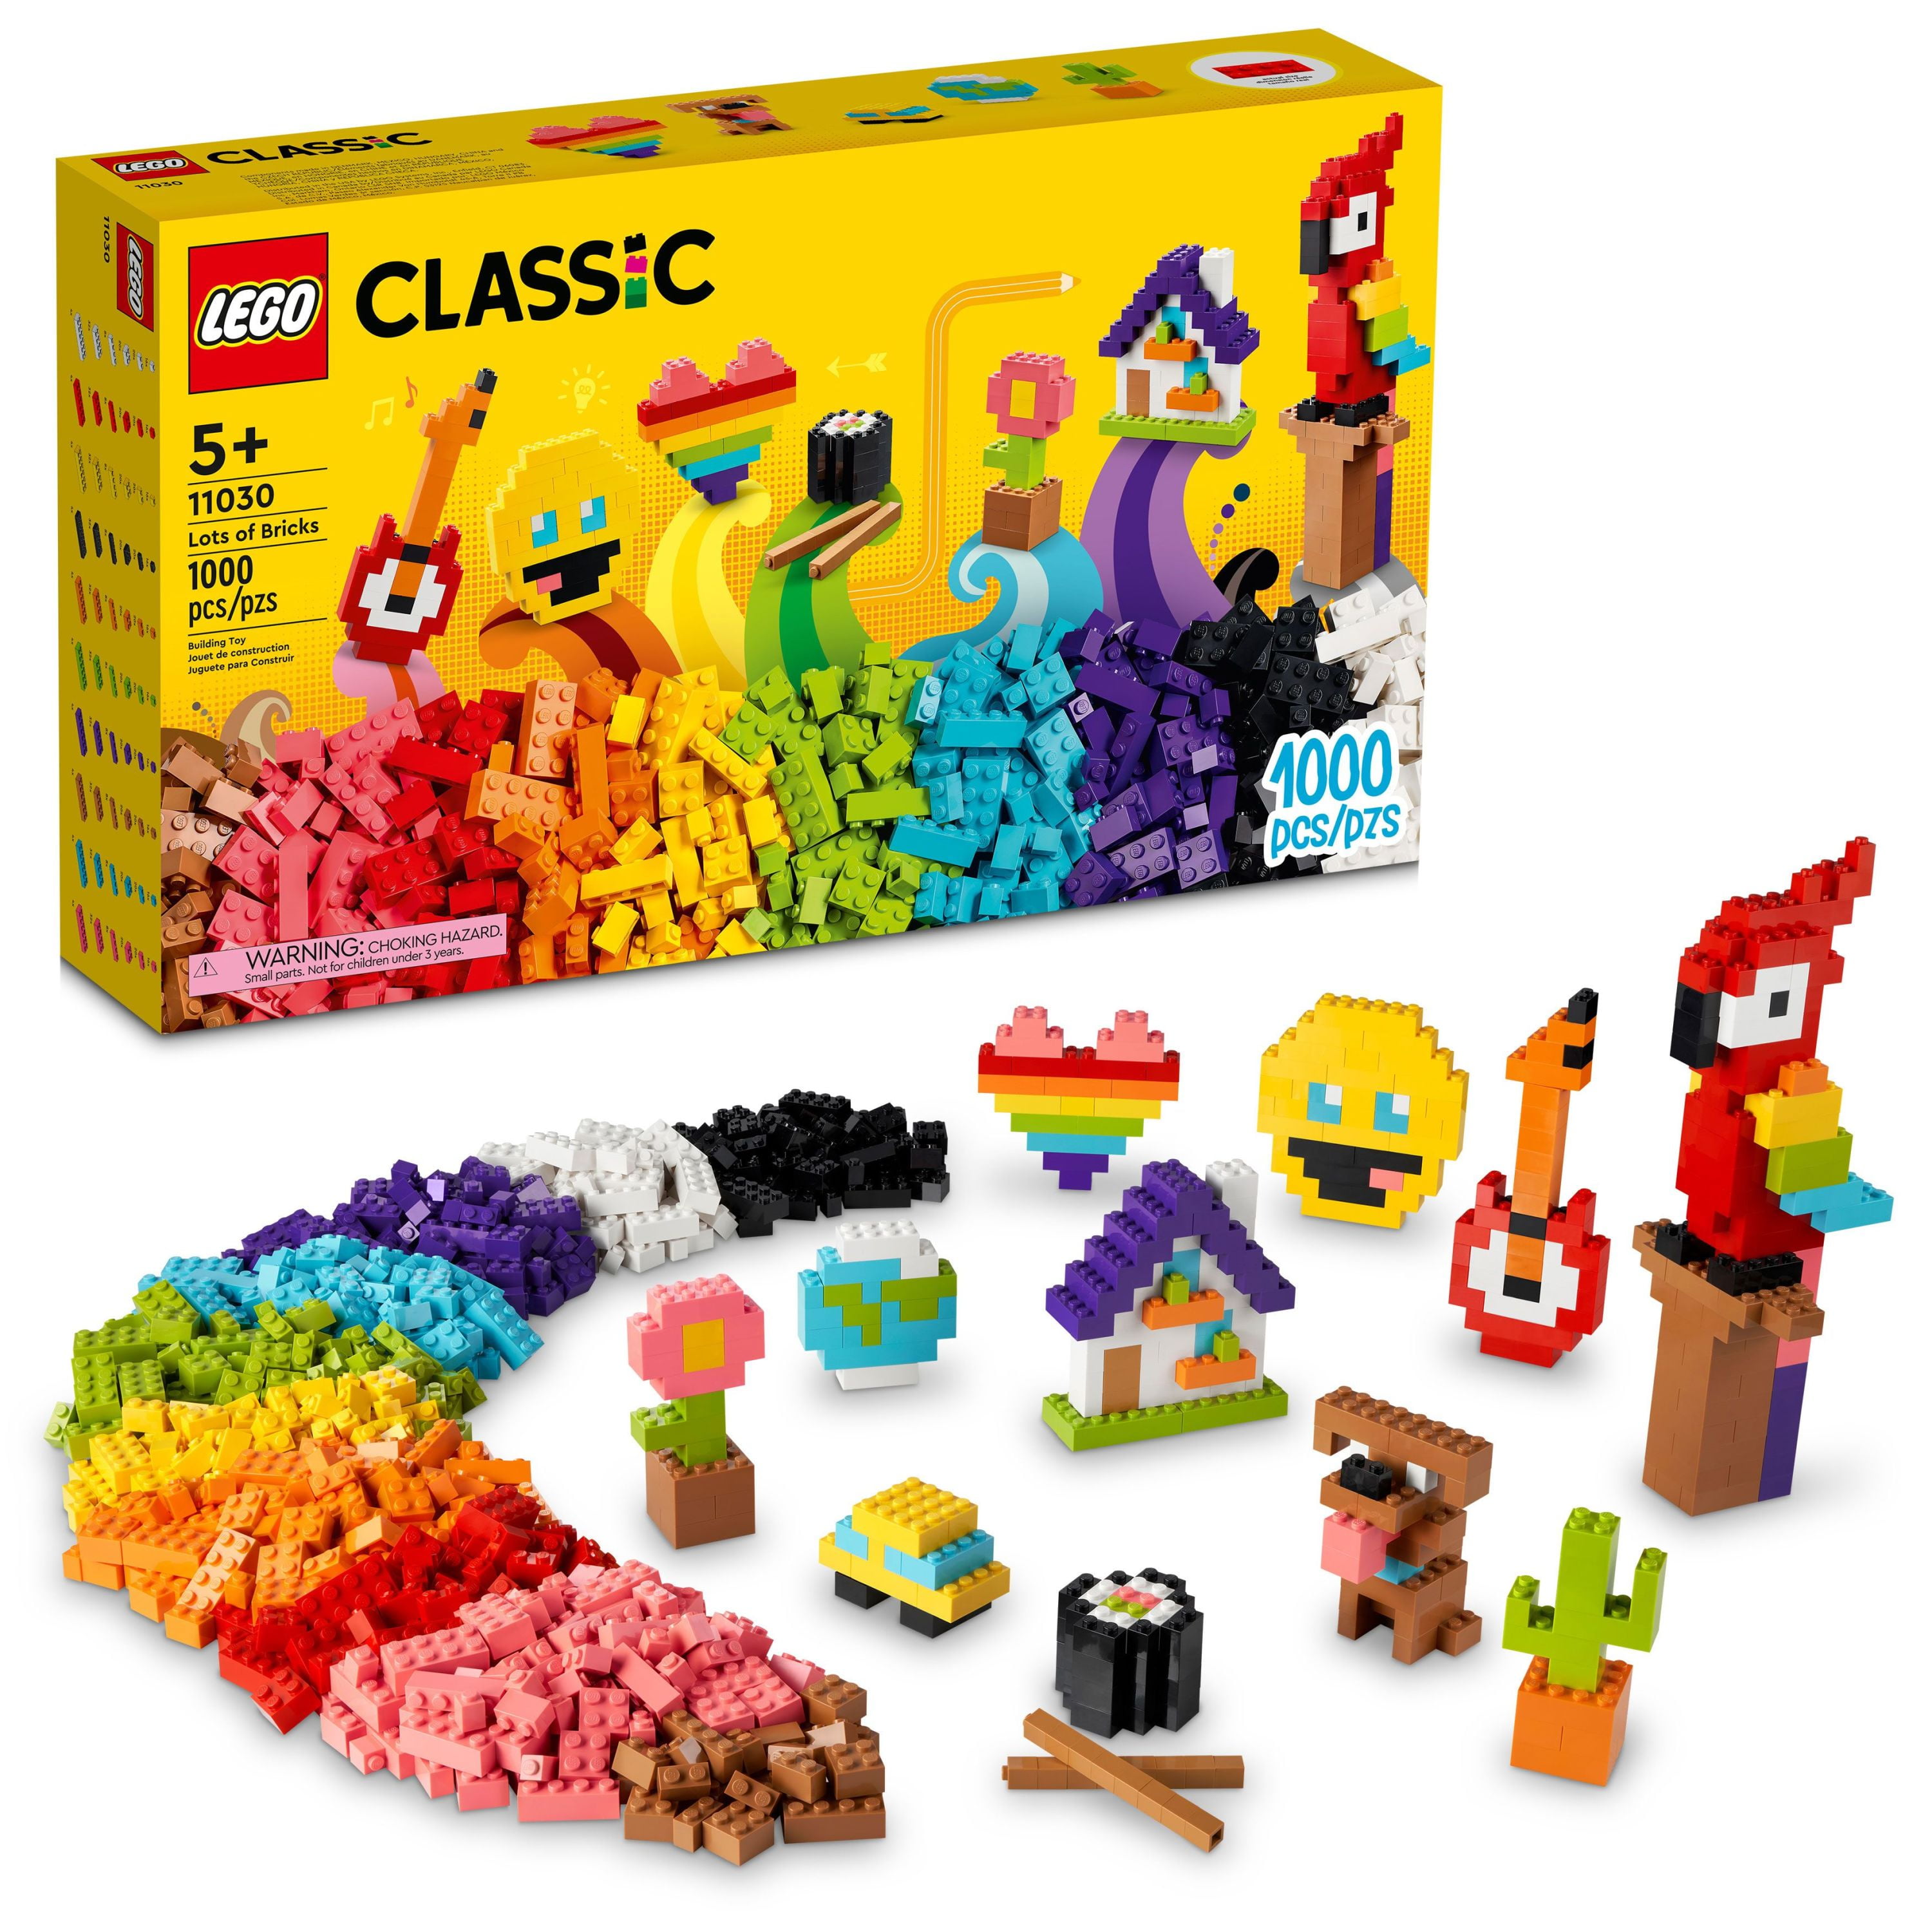  LEGO Classic Lots of Bricks Construction Toy Set 11030, Build a  Smiley Emoji, Parrot, Flowers & More, Creative Gift for Kids, Boys, Girls  Ages 5 Plus : Toys & Games